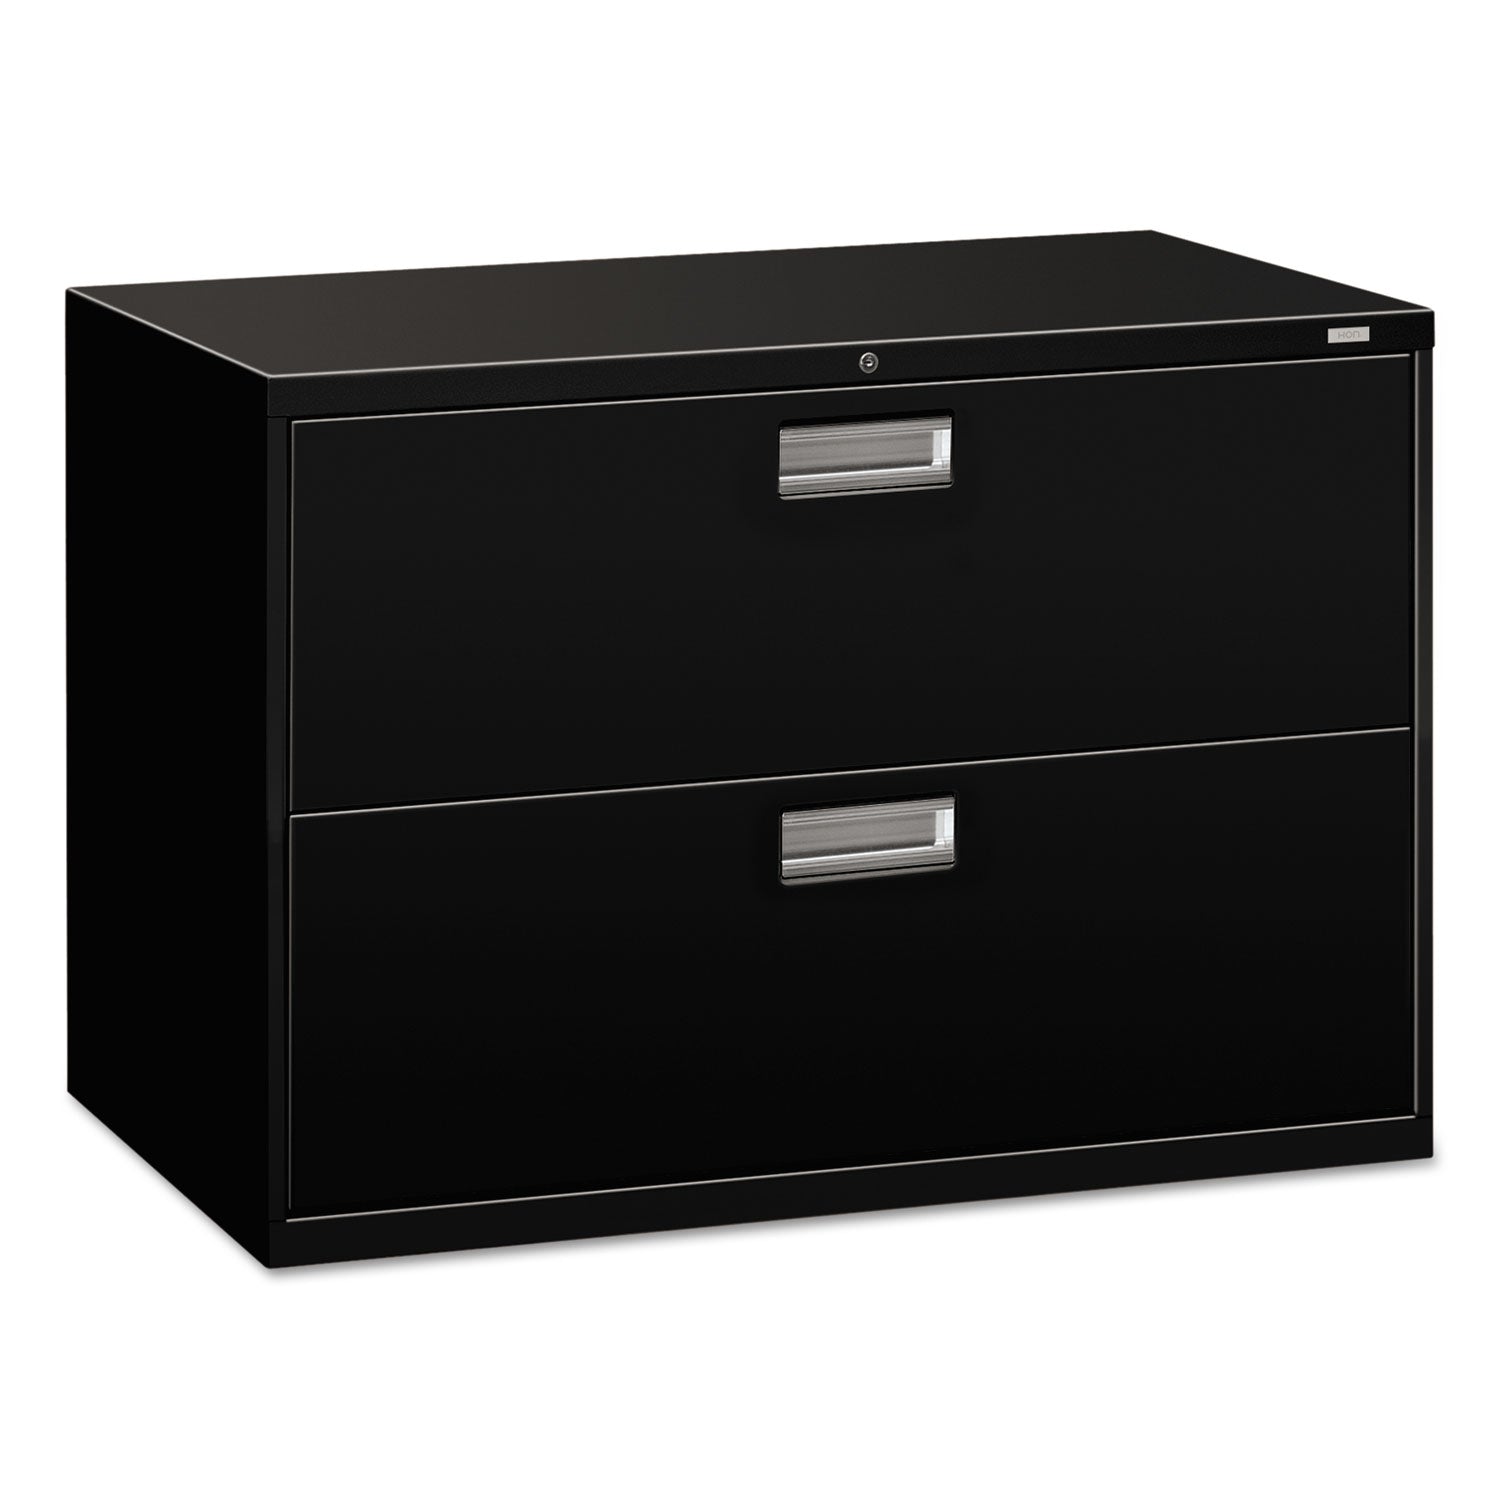 Brigade 600 Series Lateral File, 2 Legal/Letter-Size File Drawers, Black, 42" x 18" x 28 - 